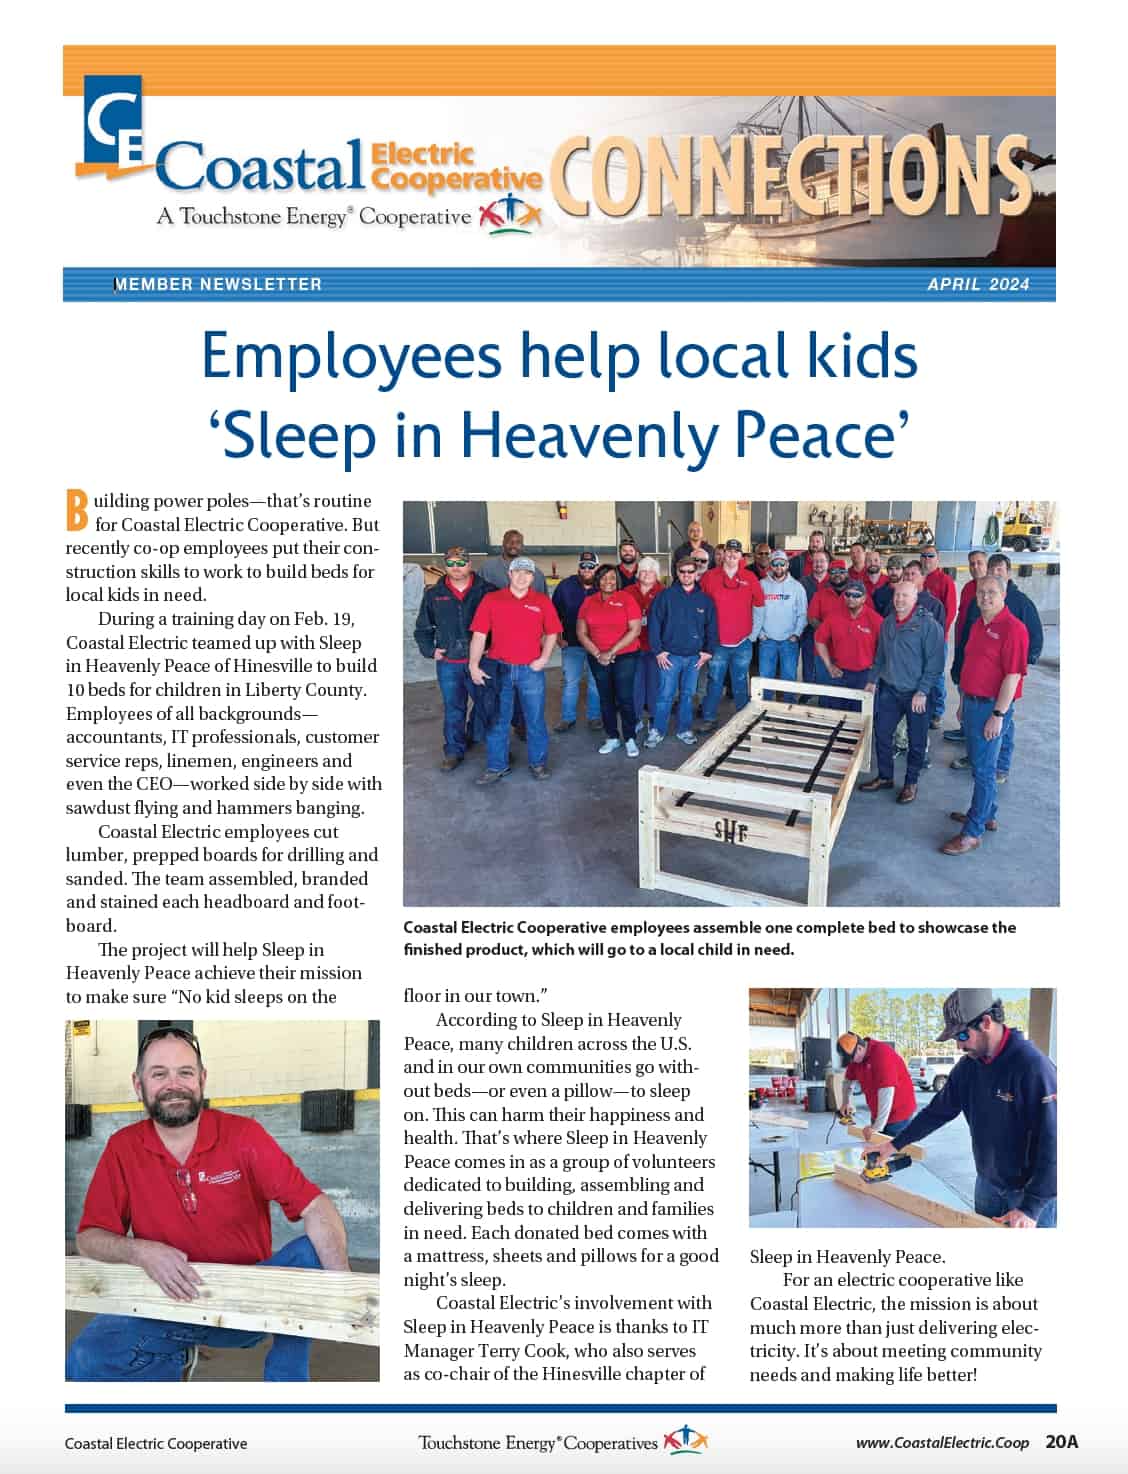 Sample Connections newsletter cover featuring Coastal Electric Cooperative employees with a children's bed that they built.